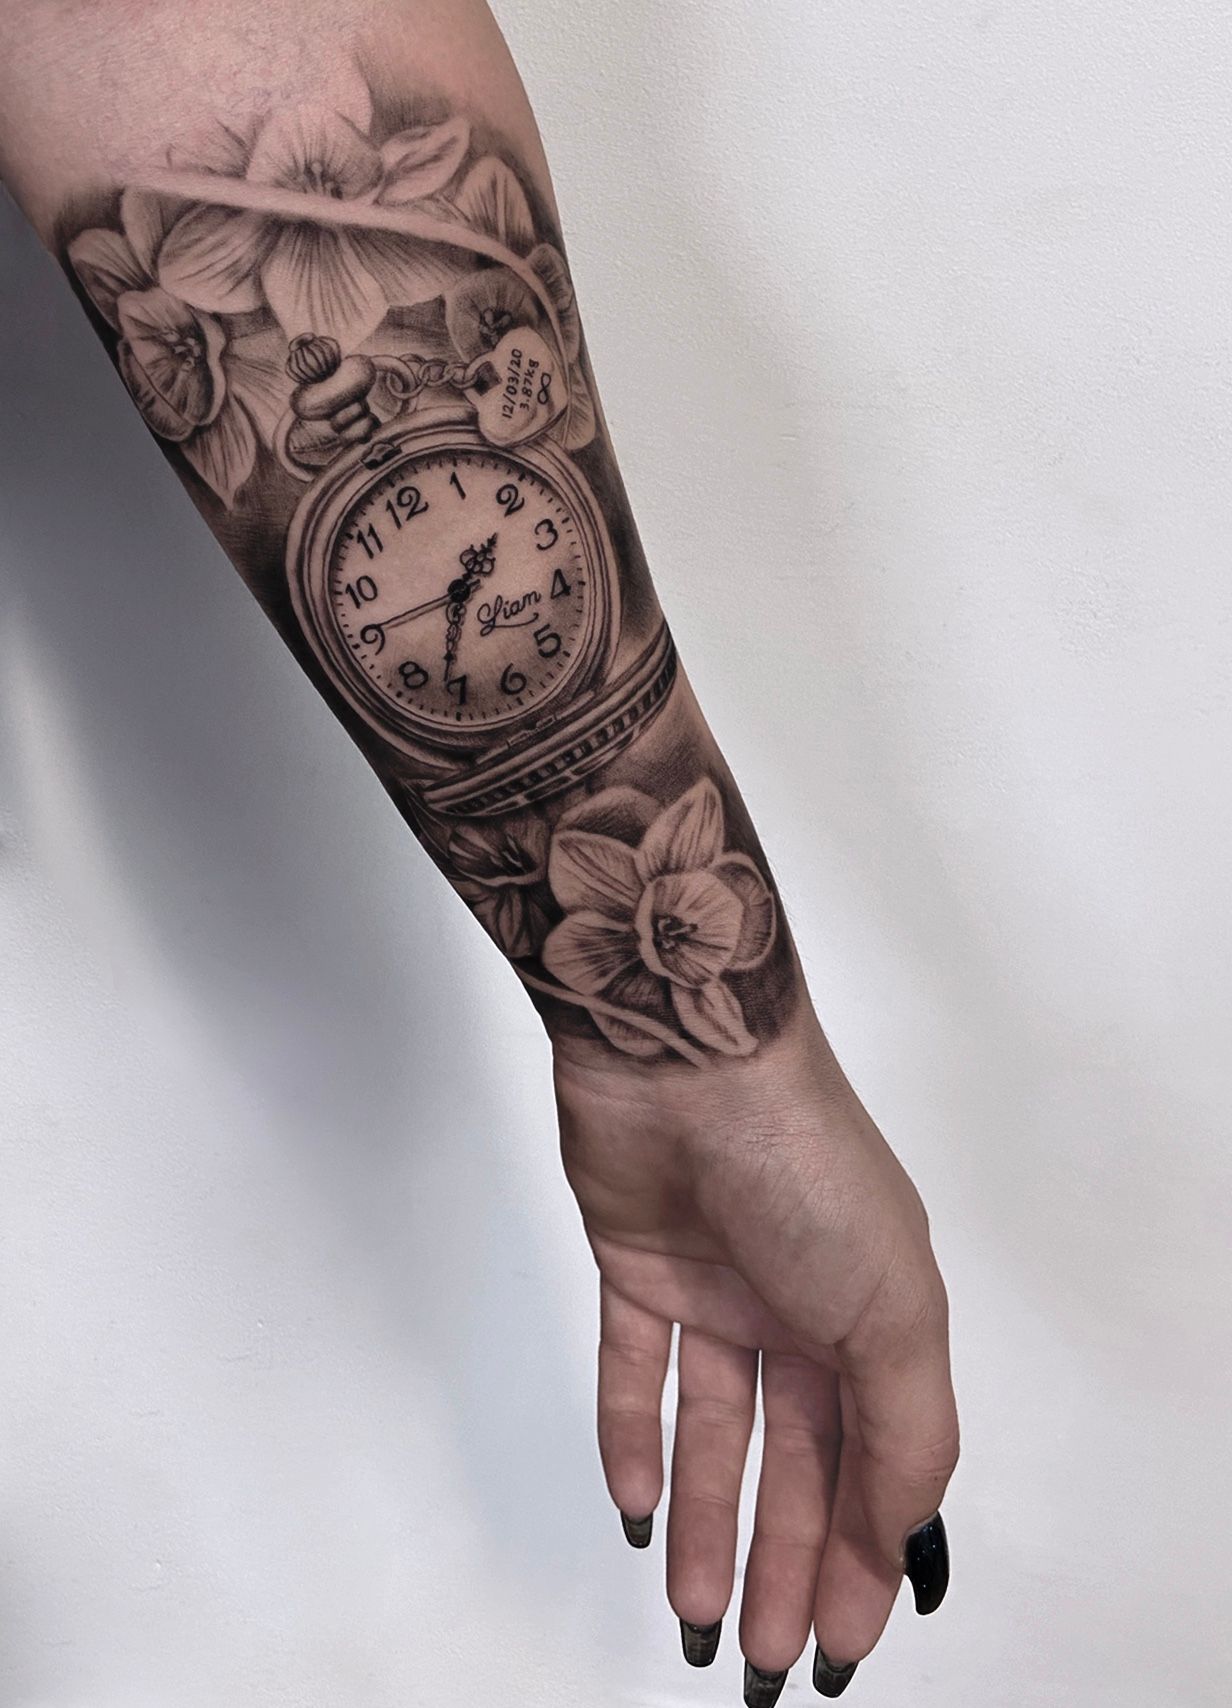 Tattoo Trends - Below Rose tattoo not done by us ! CLOCK TATTOO is a way to  show the passing of time and the importance of living each moment to the  fullest.